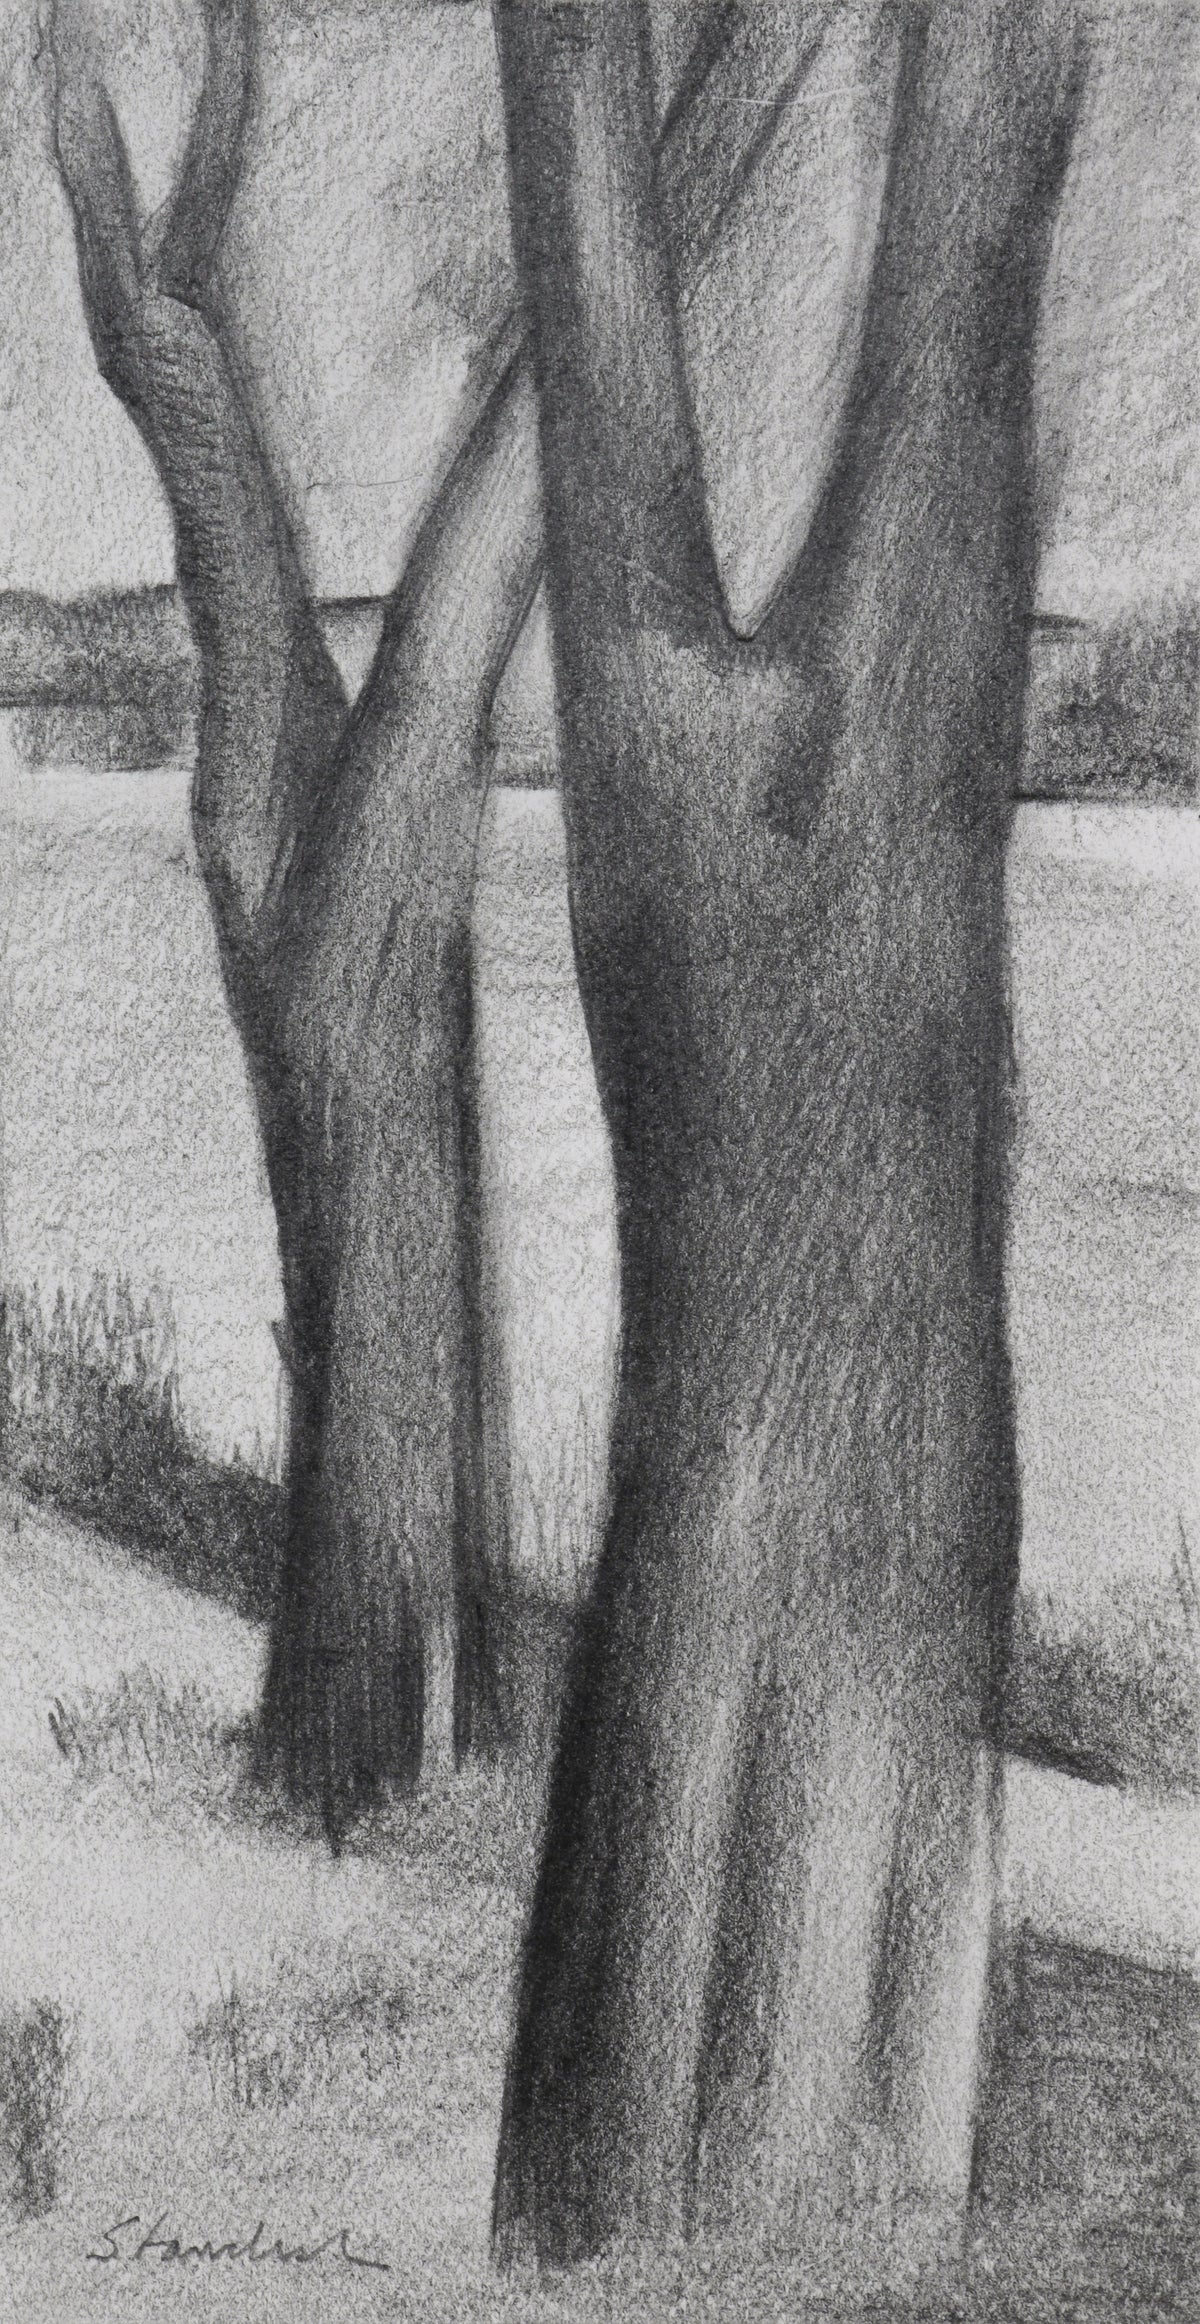 Two Trees &lt;br&gt;Late 20th Century Graphite &lt;br&gt;&lt;br&gt;#B6673